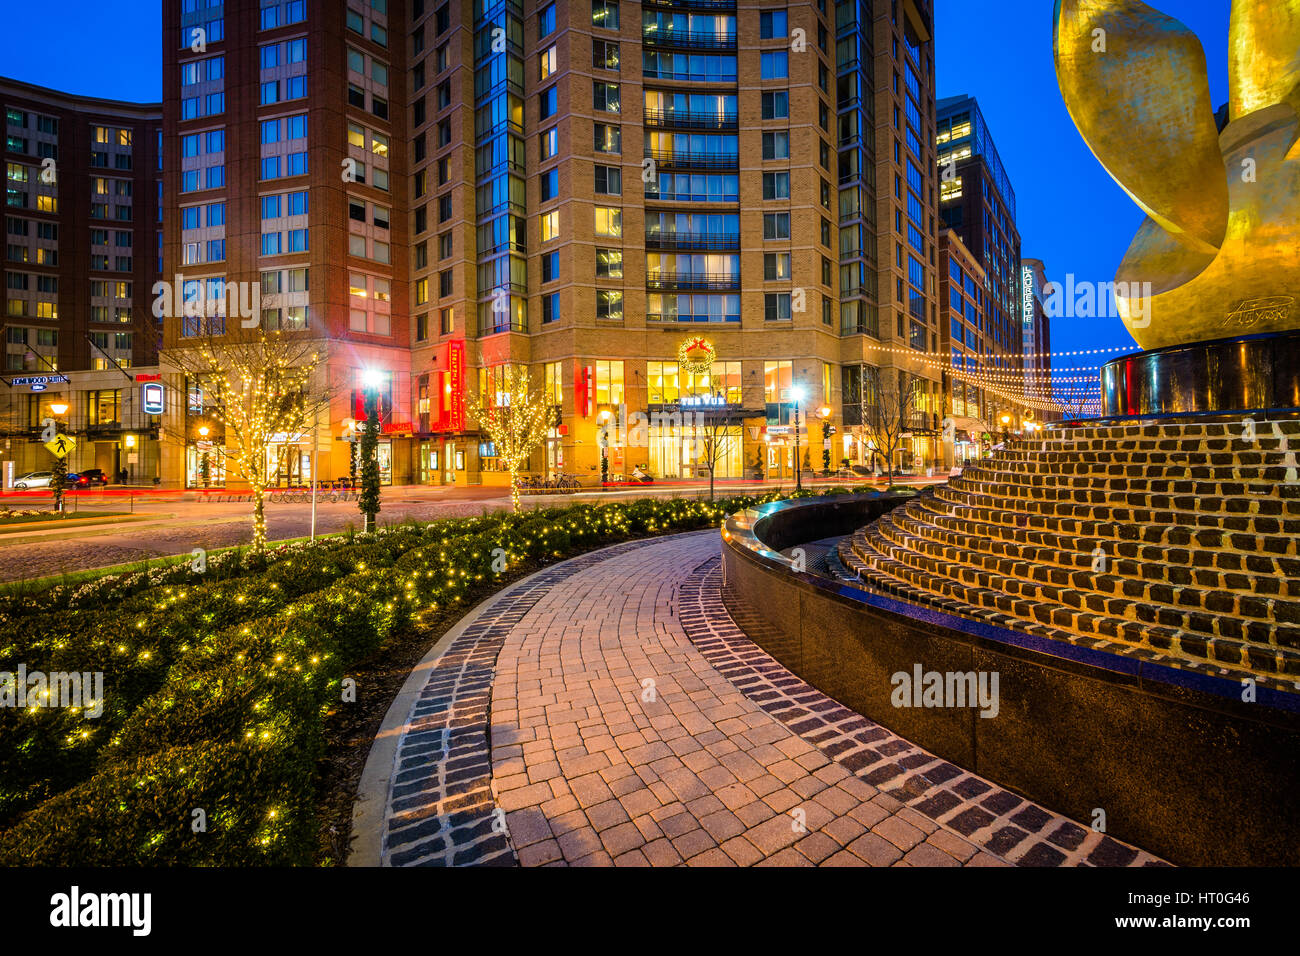 The National Katyń Memorial and modern buildings at night, in Harbor East, Baltimore, Maryland. Stock Photo